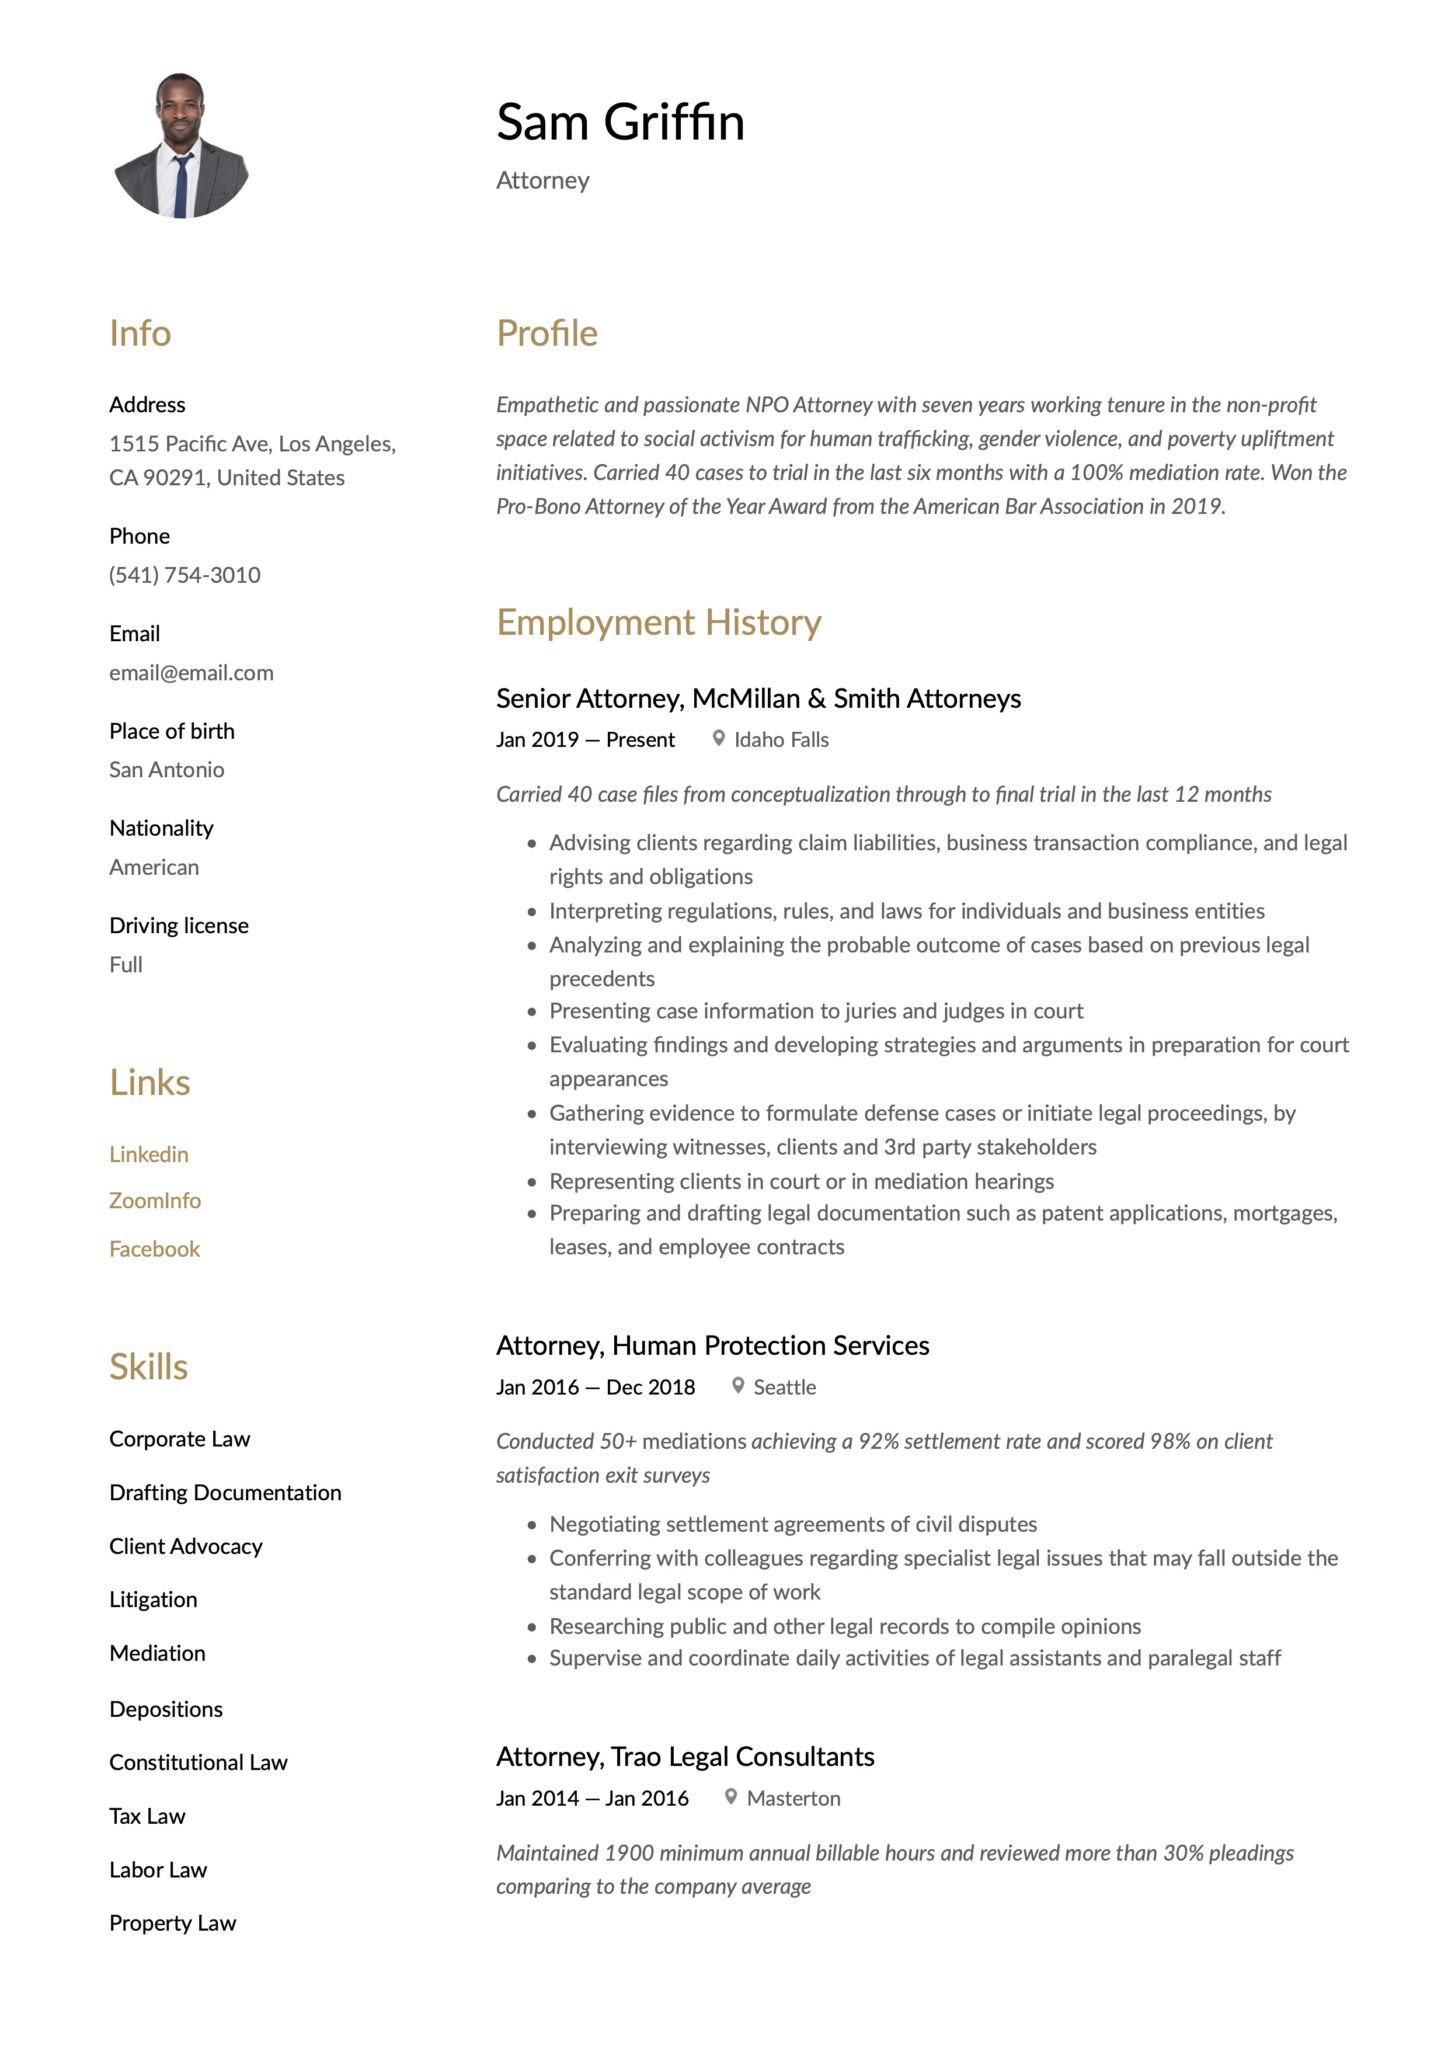 Sample Resume About Personal Injury attorney 18 attorney Resume Examples & Writing Guide Templates 2022